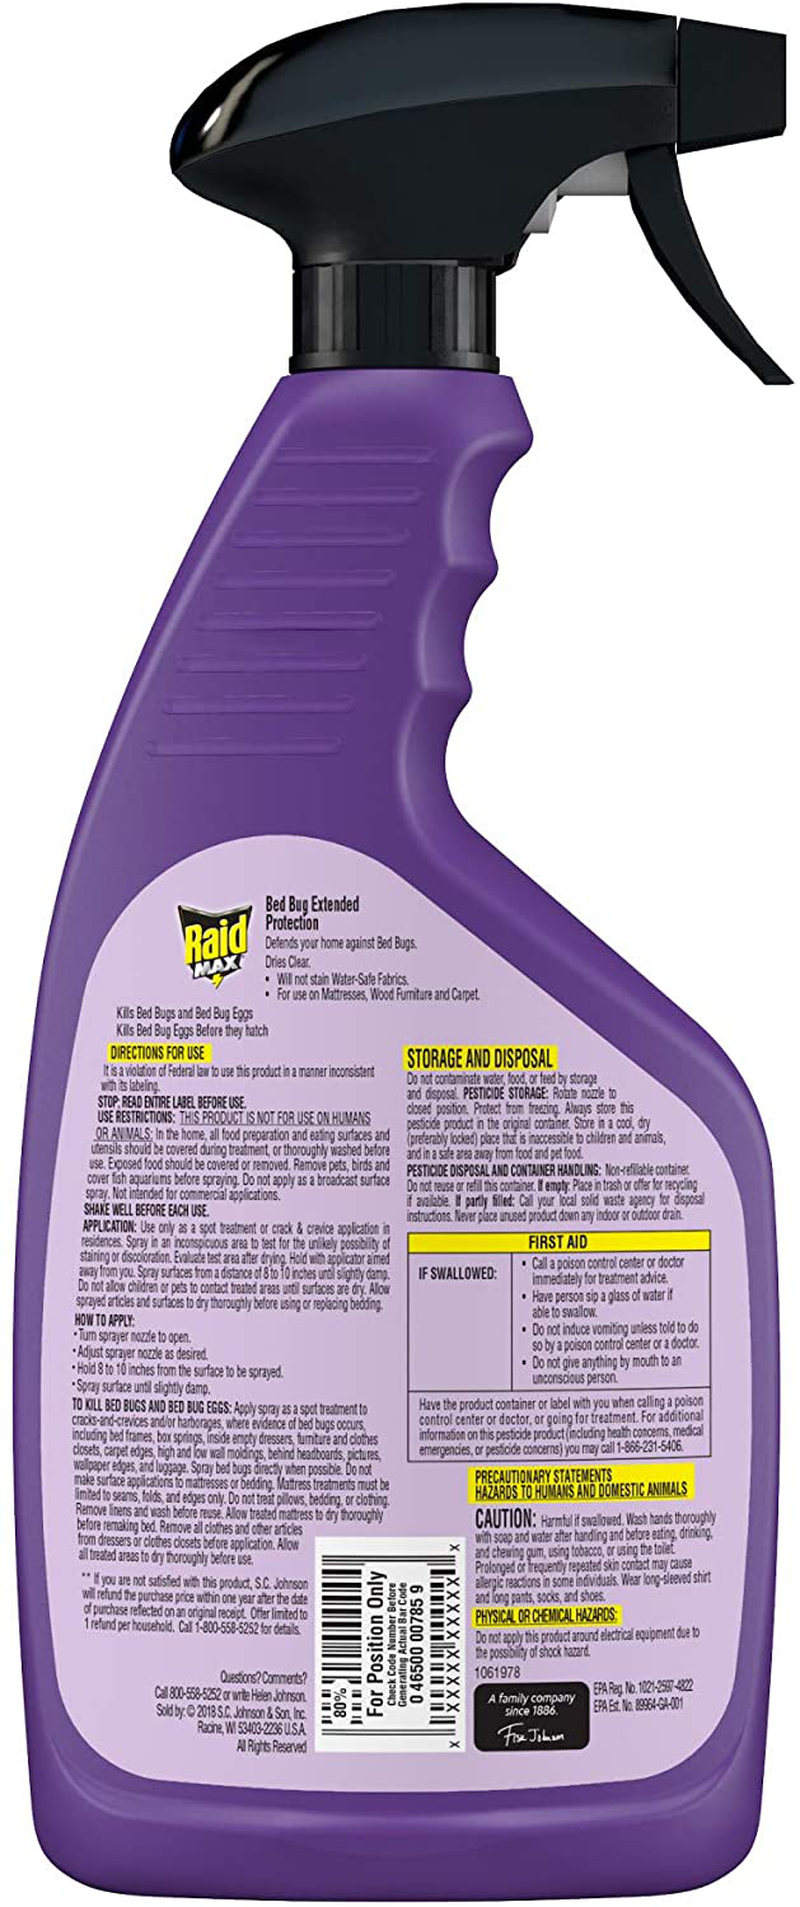 Raid Max Bed Bug Crack & Crevice Extended Protection Foaming Spray, Kills Bed Bugs for up to 8 weeks*, 22 Oz, Pack of 4